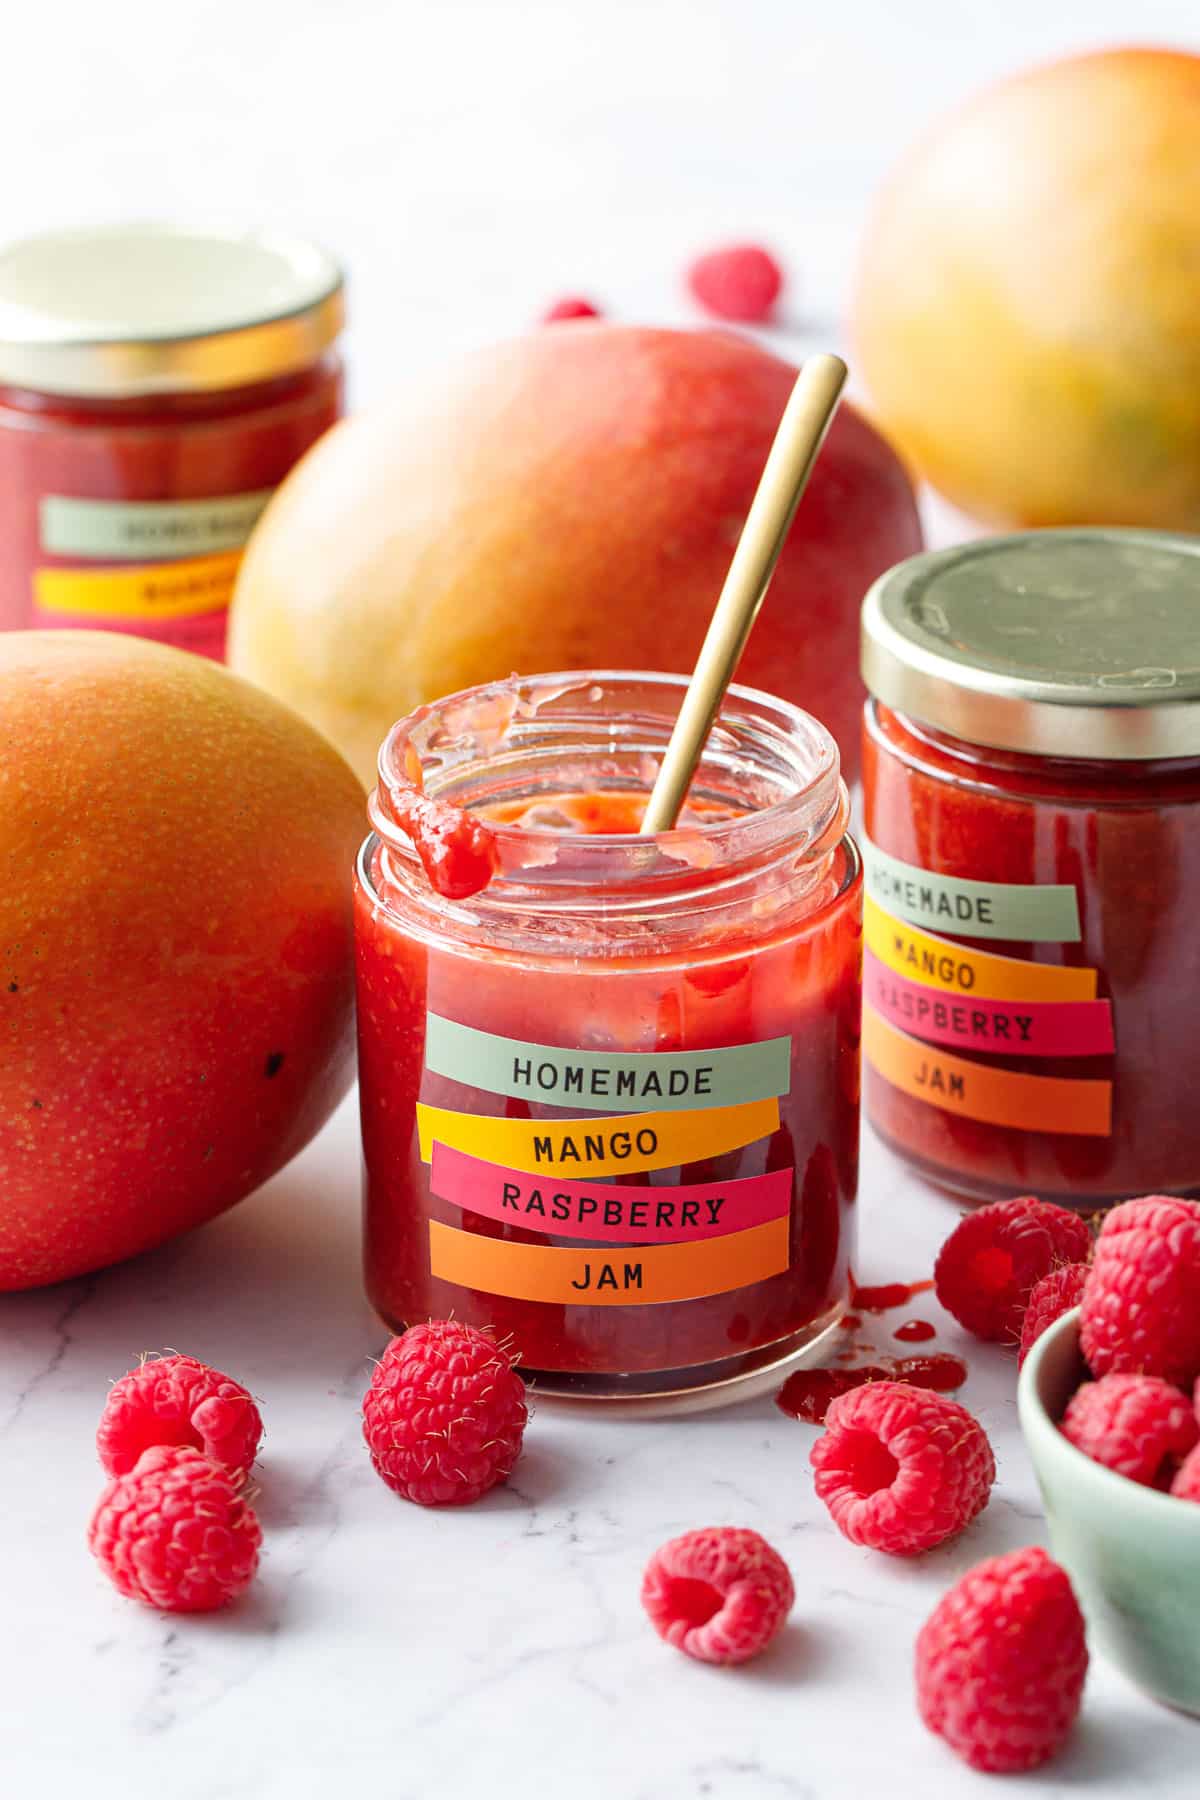 Jars of Mango Raspberry Jam with fresh mangoes and raspberries scattered around, one jar open with a spoon sticking out.